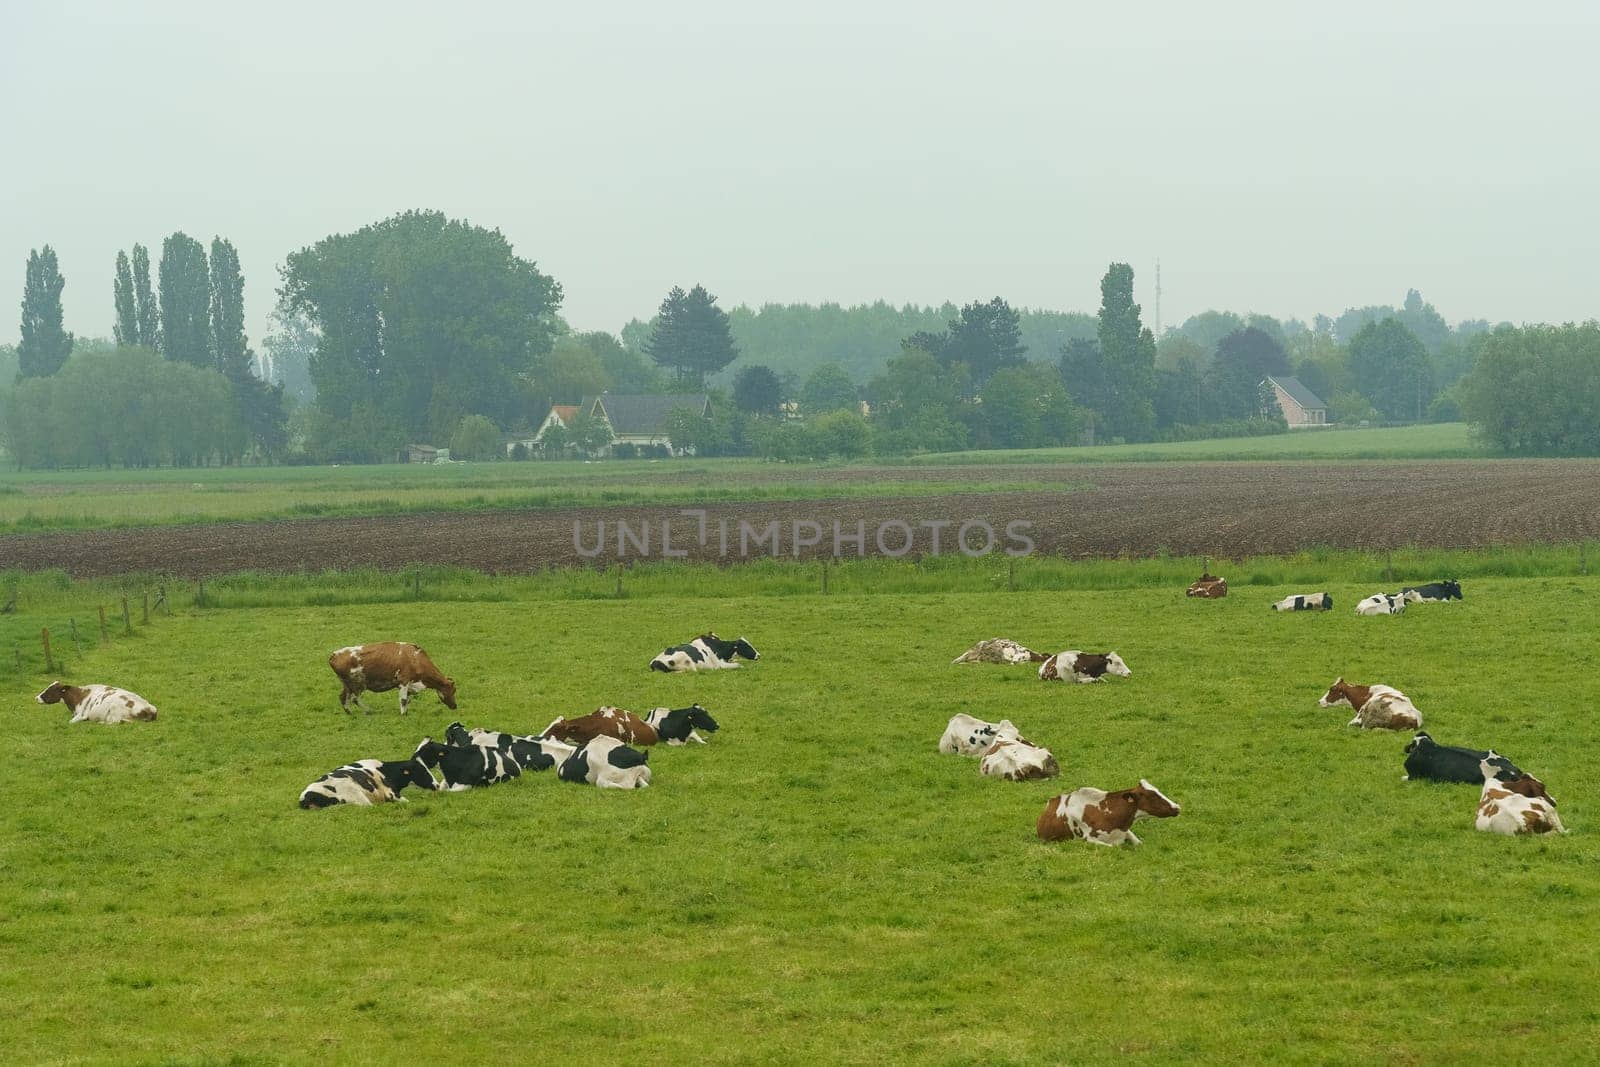 A group of cows rest and graze on the green grass of a rural farm. In the background, a small village and farm buildings are silhouetted against a fading overcast sky, enhancing the pastoral tranquility of the setting.